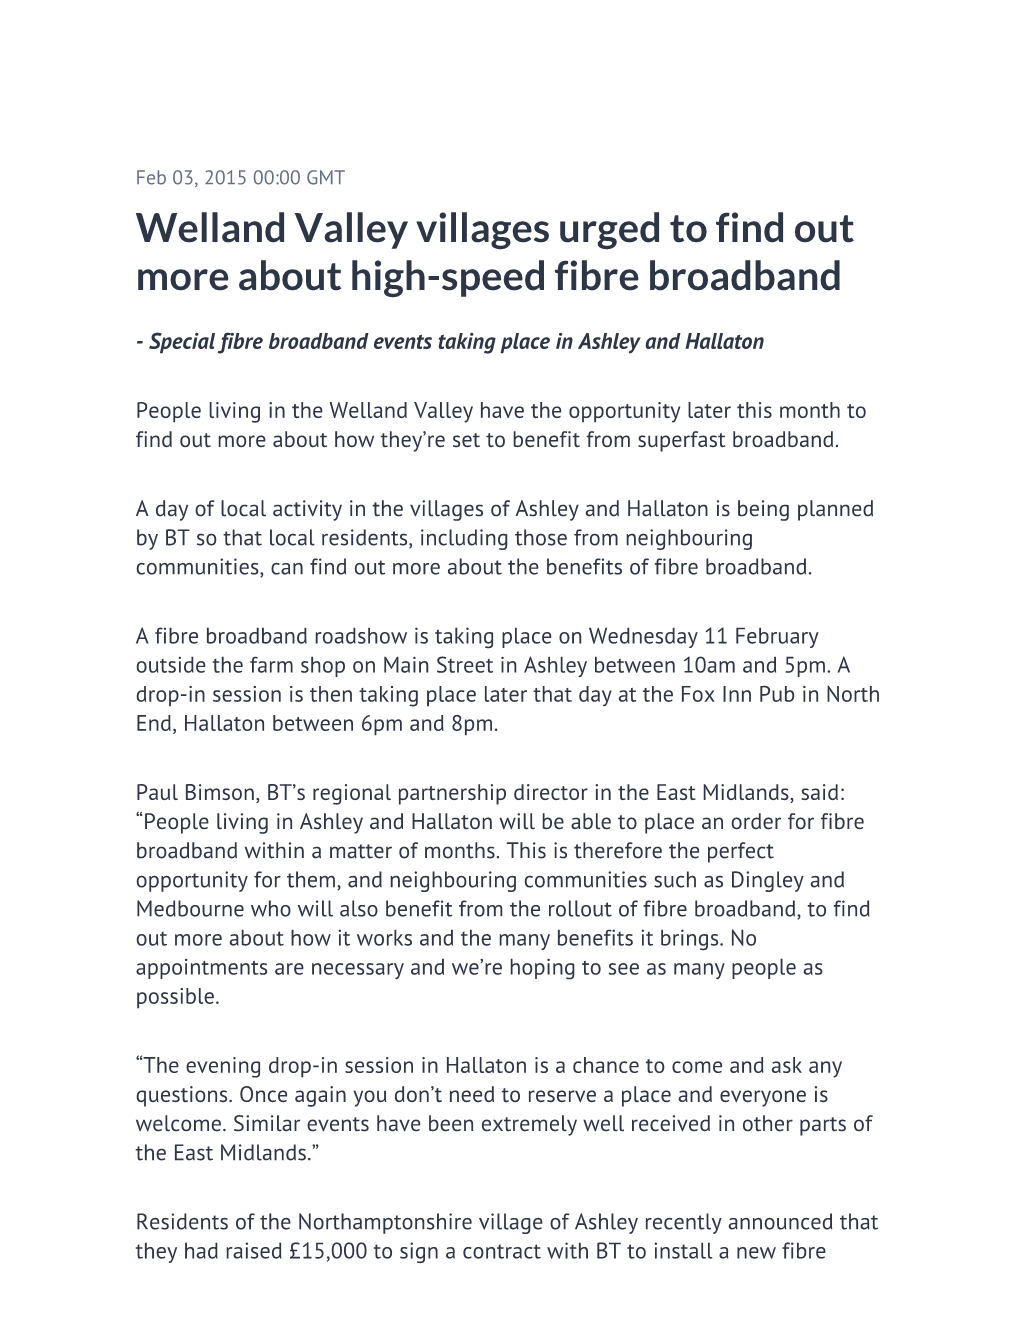 Welland Valley Villages Urged to Find out More About High-Speed Fibre Broadband